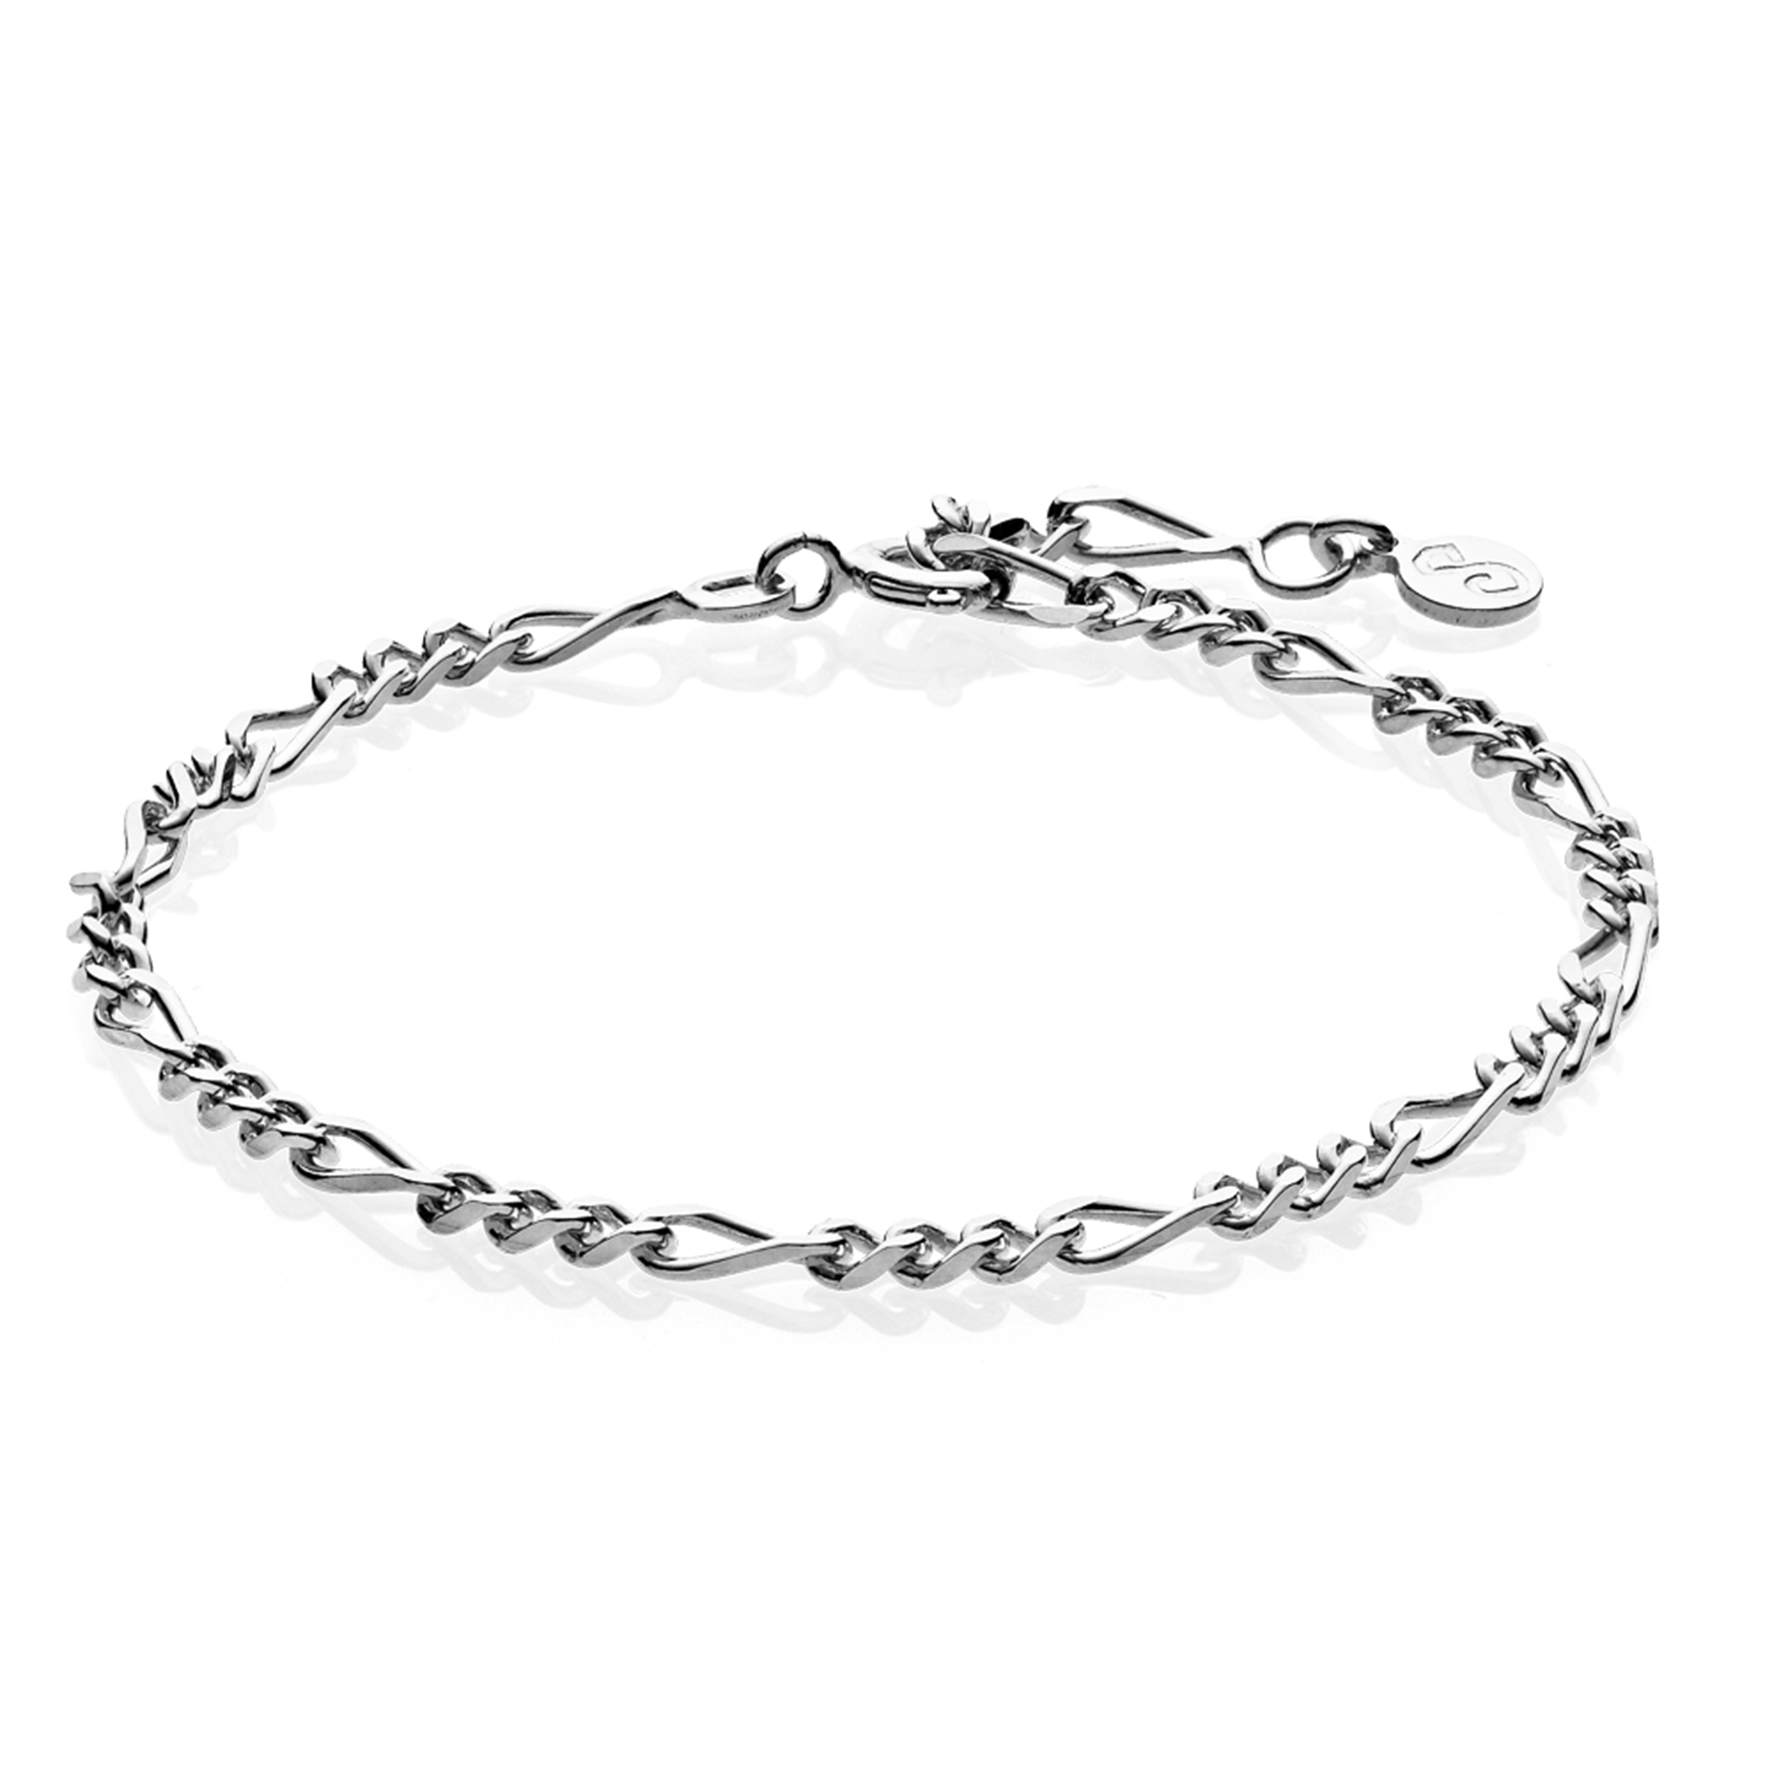 Lizzy Anklet from Sistie in Silver Sterling 925